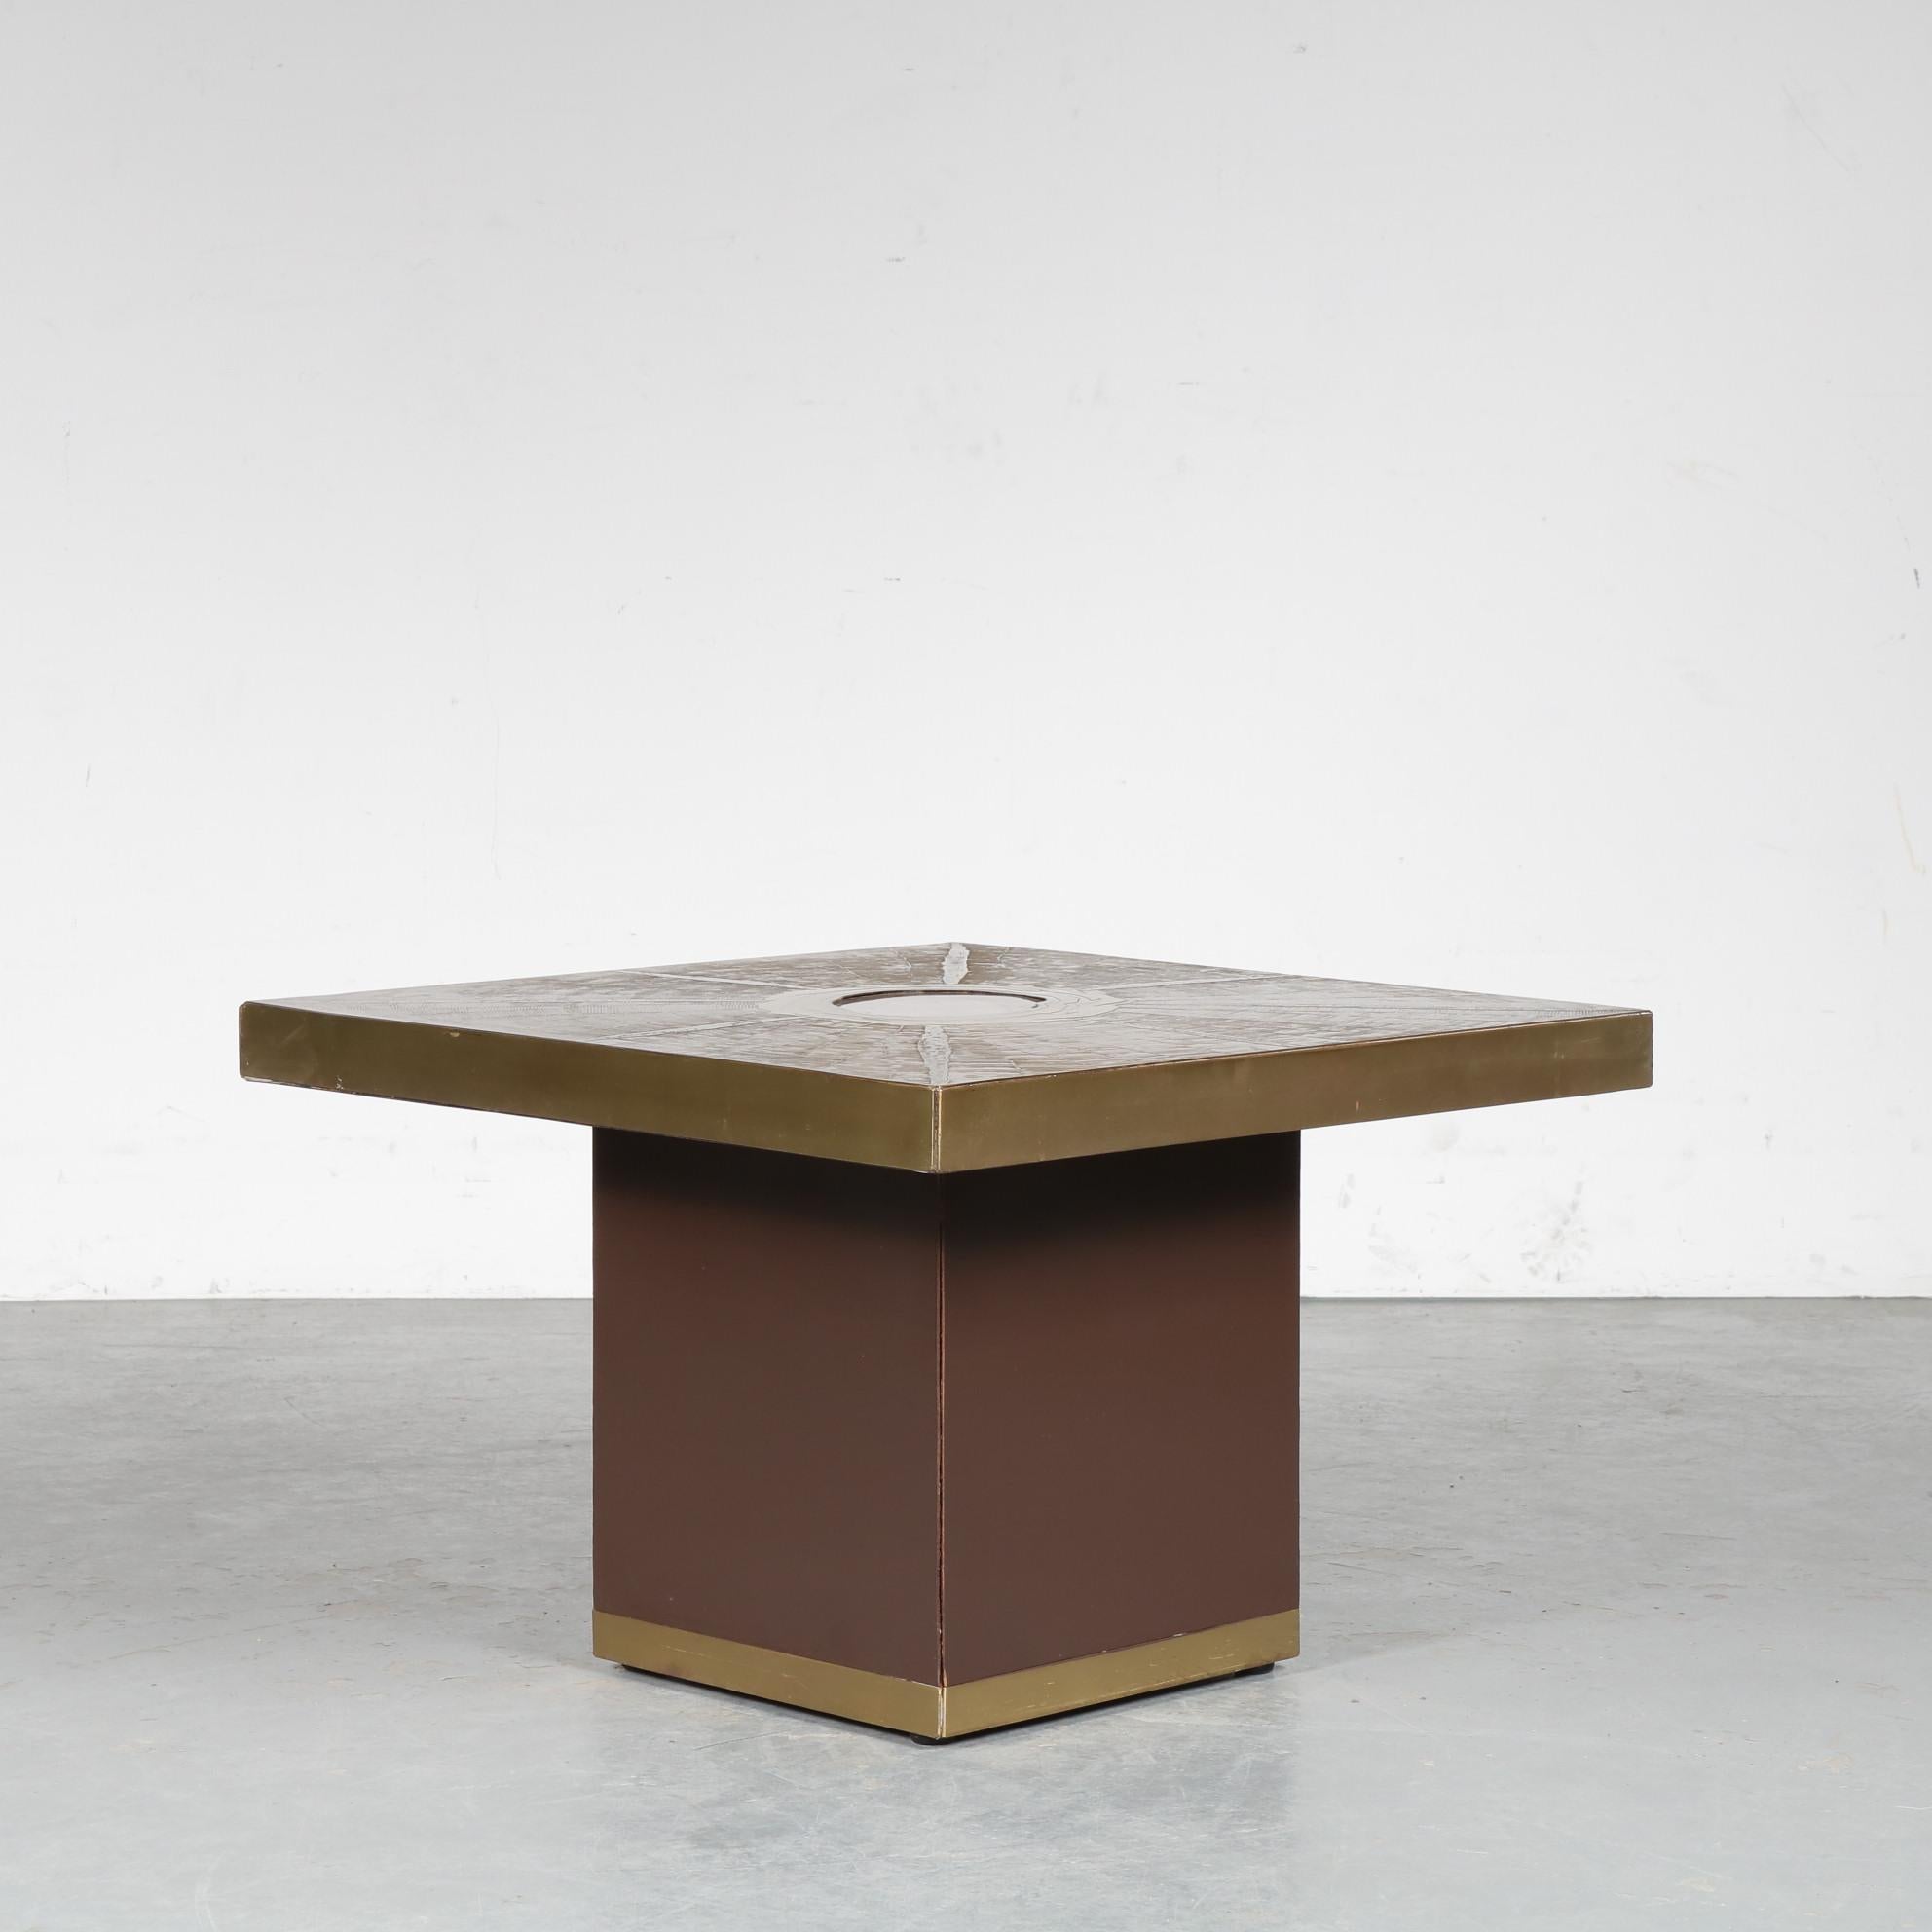 Late 20th Century Square Coffee Table by Paco Rabanne for Lova Creation, Belgium 1970 For Sale